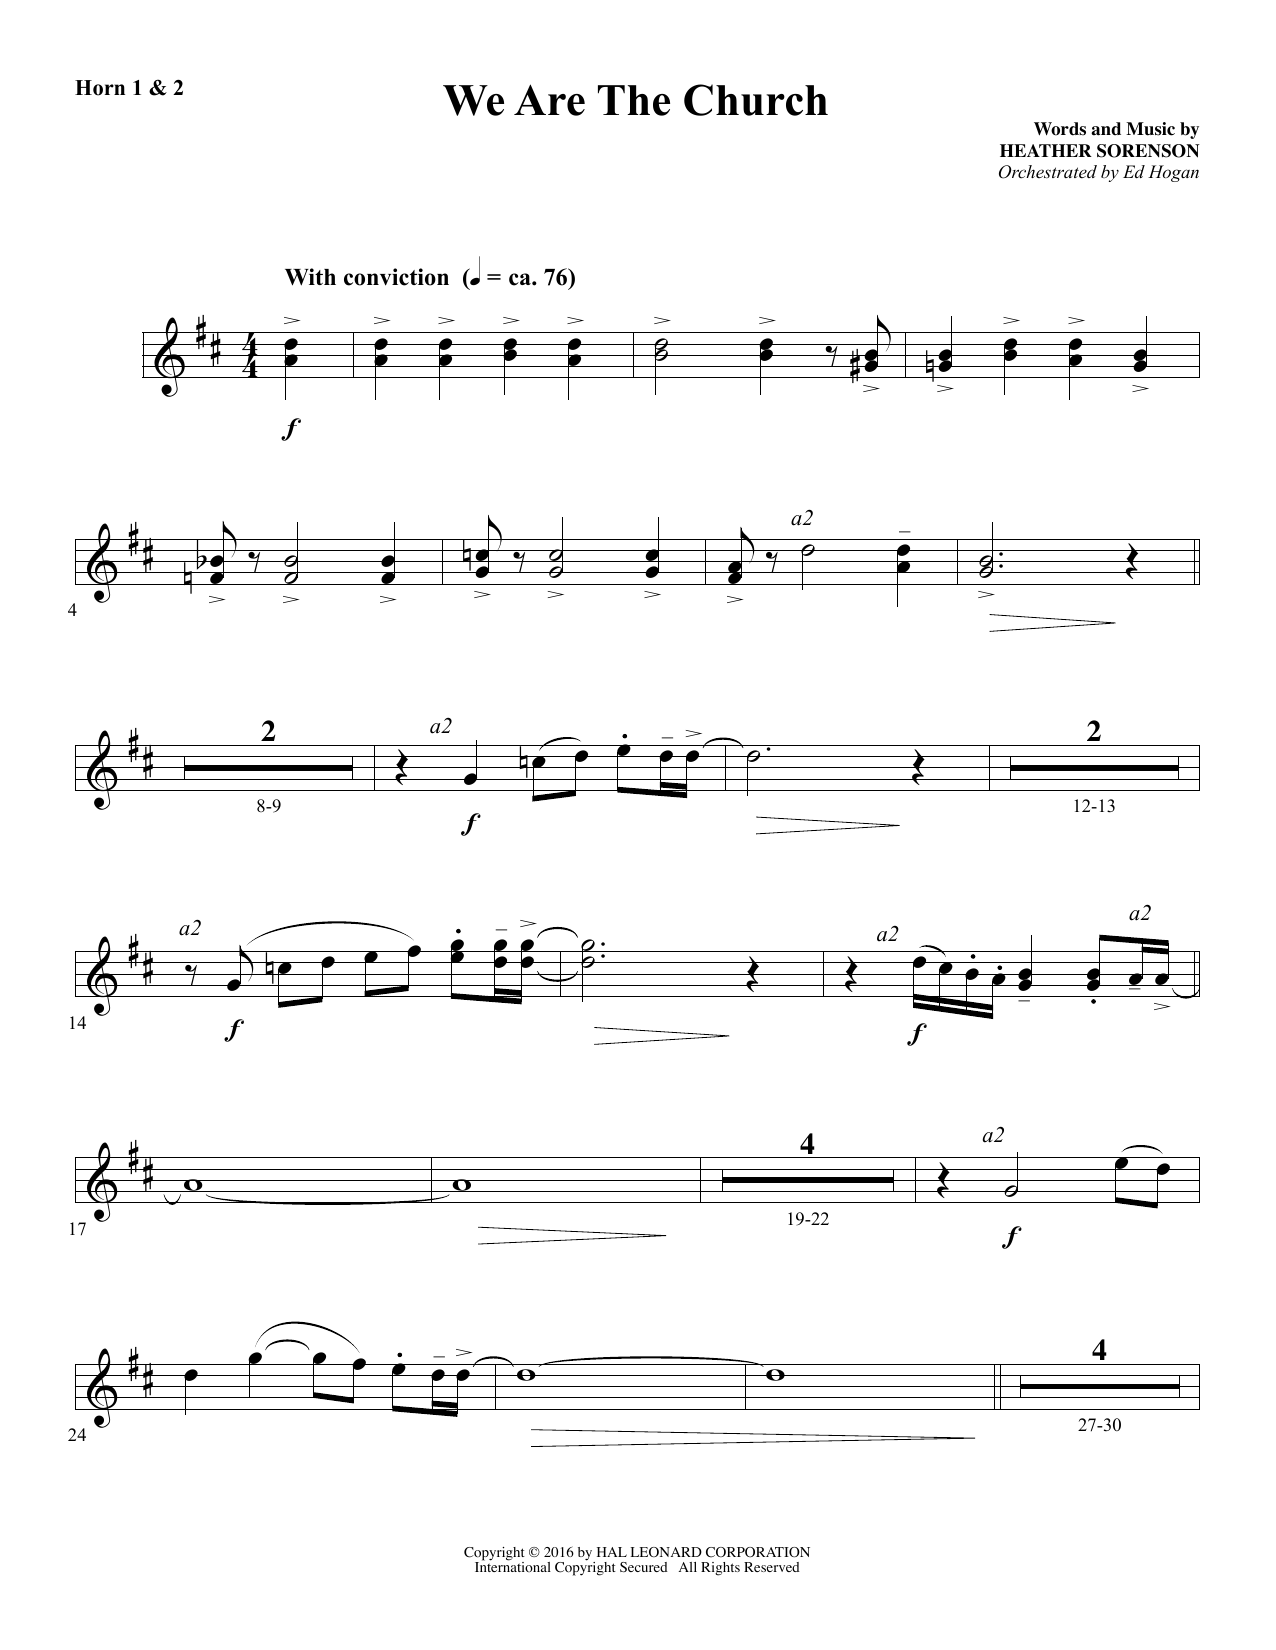 Download Heather Sorenson We Are the Church - F Horn 1 & 2 sheet music and printable PDF score & Sacred music notes